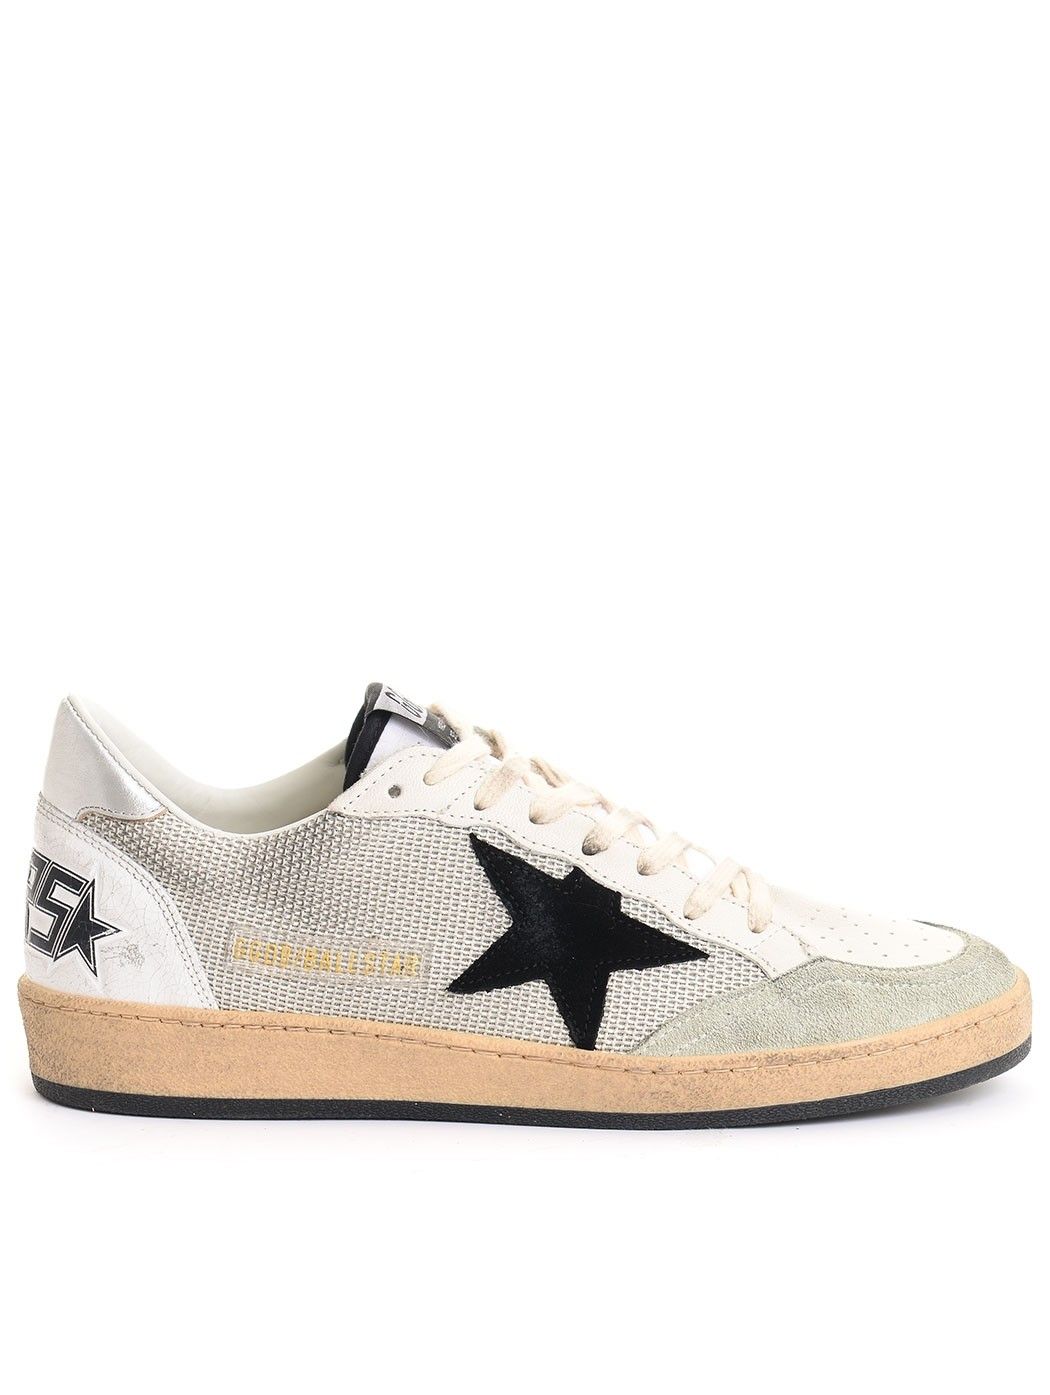  MAN SHOES,CHURCH'S SHOES,CHURCH'S LOAFER SHOES,GOLDEN GOOSE SNEAKERS,GOLDEN GOOSE SHOES,DIADORA HERITAGE SNEAKERS  GOLDEN GOOSE GMF00117